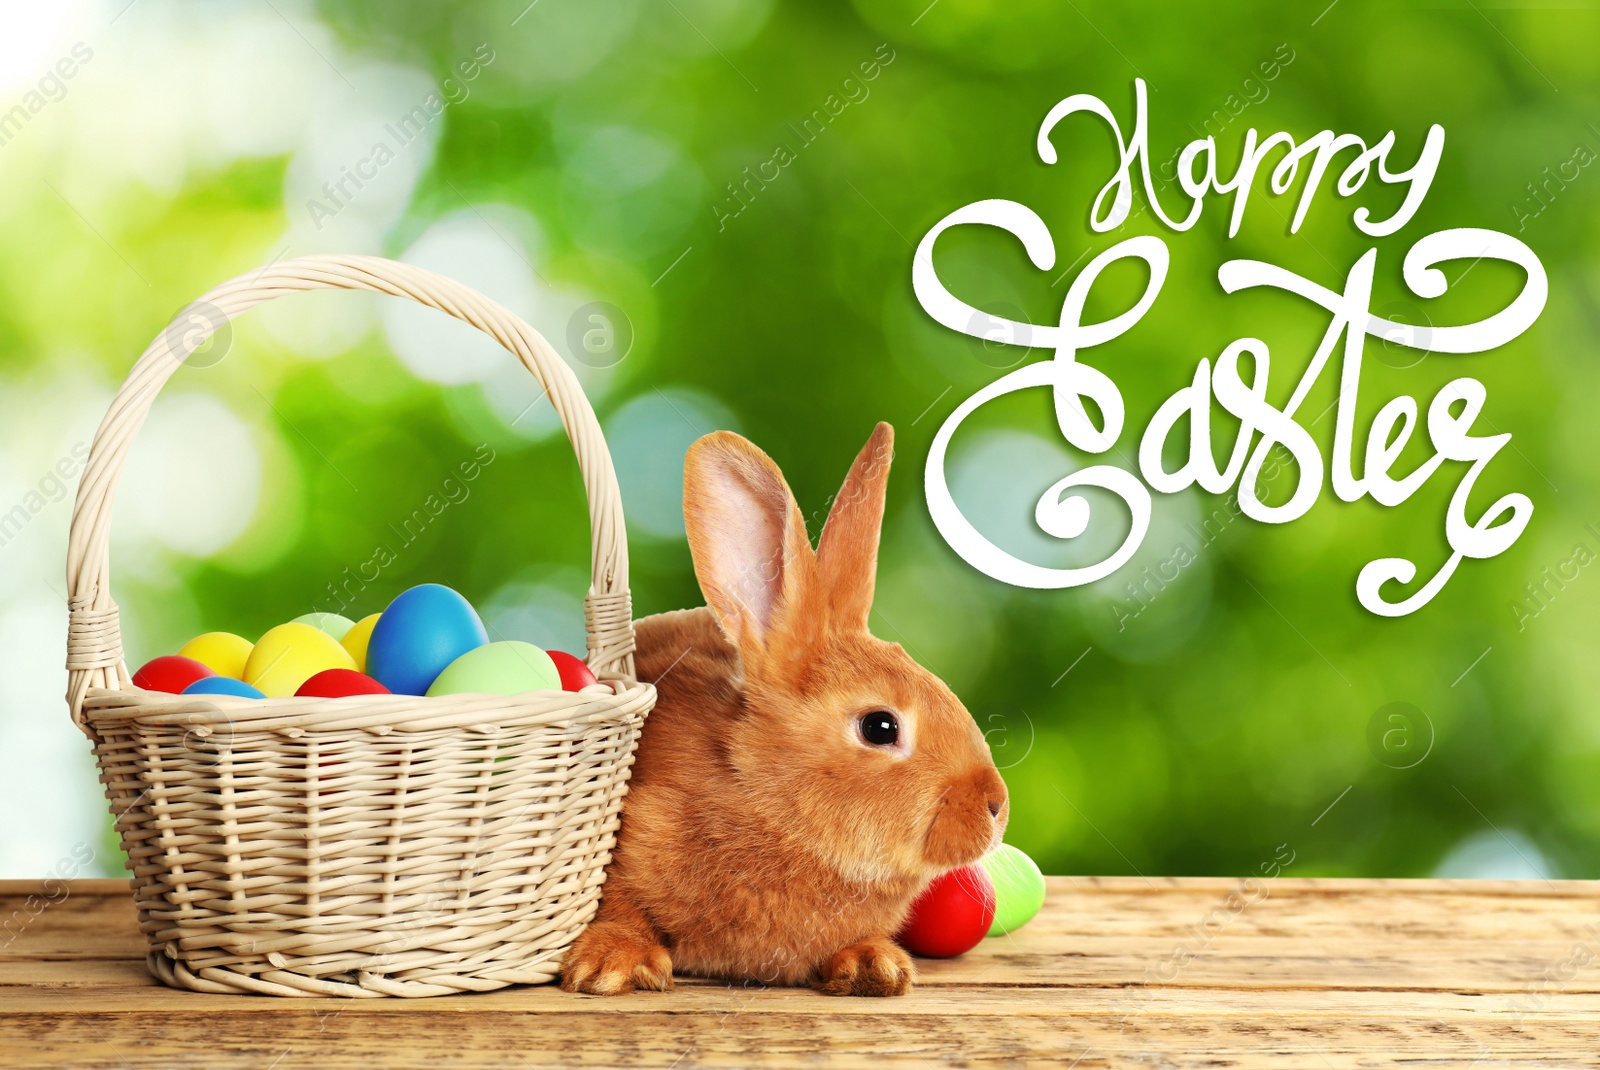 Image of Happy Easter. Adorable bunny and wicker basket with eggs on wooden table outdoors